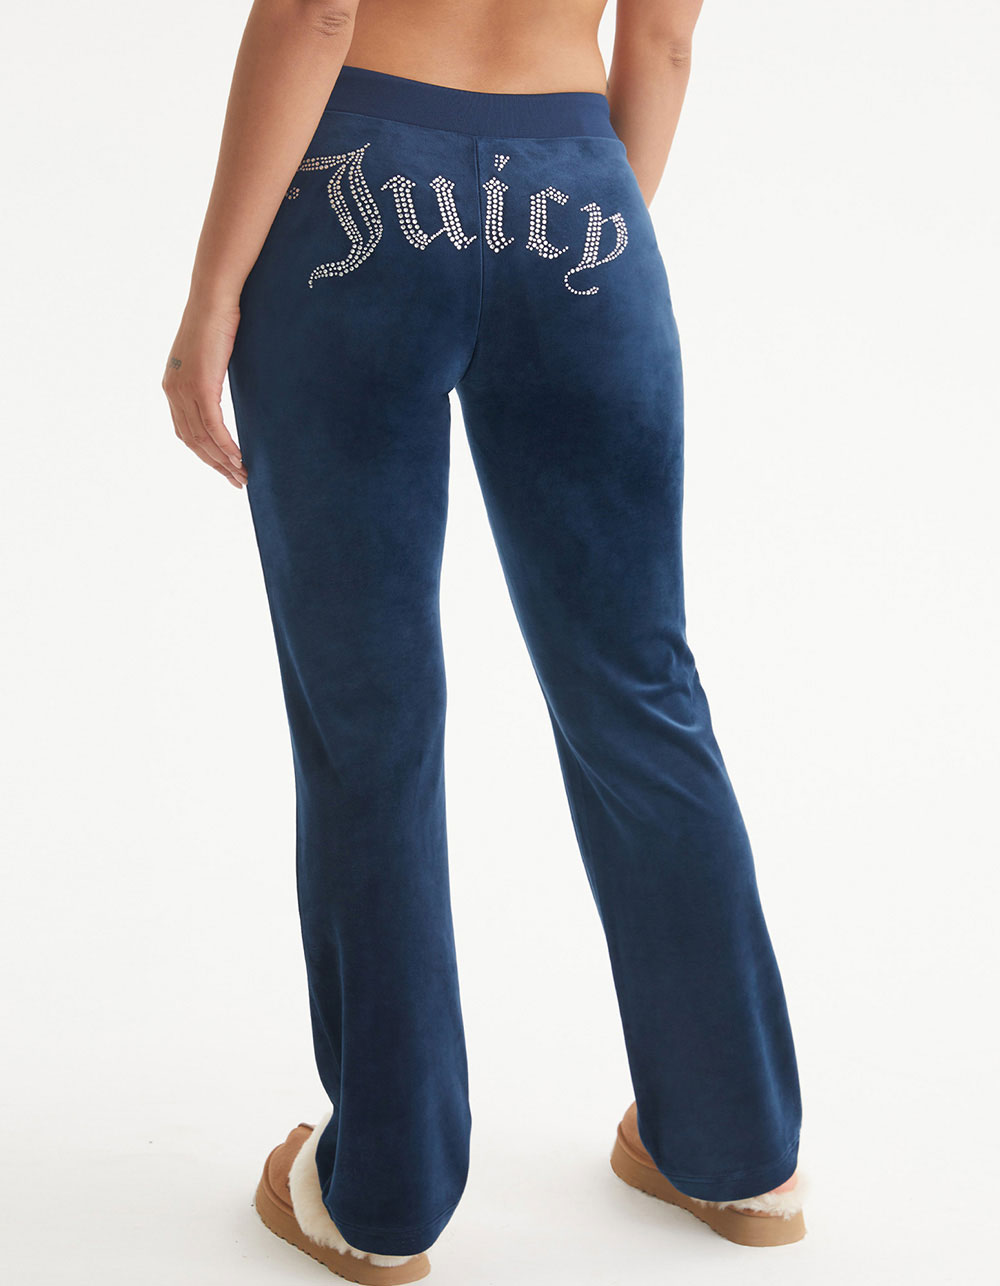 JUICY COUTURE OG Bling Womens Track Pants